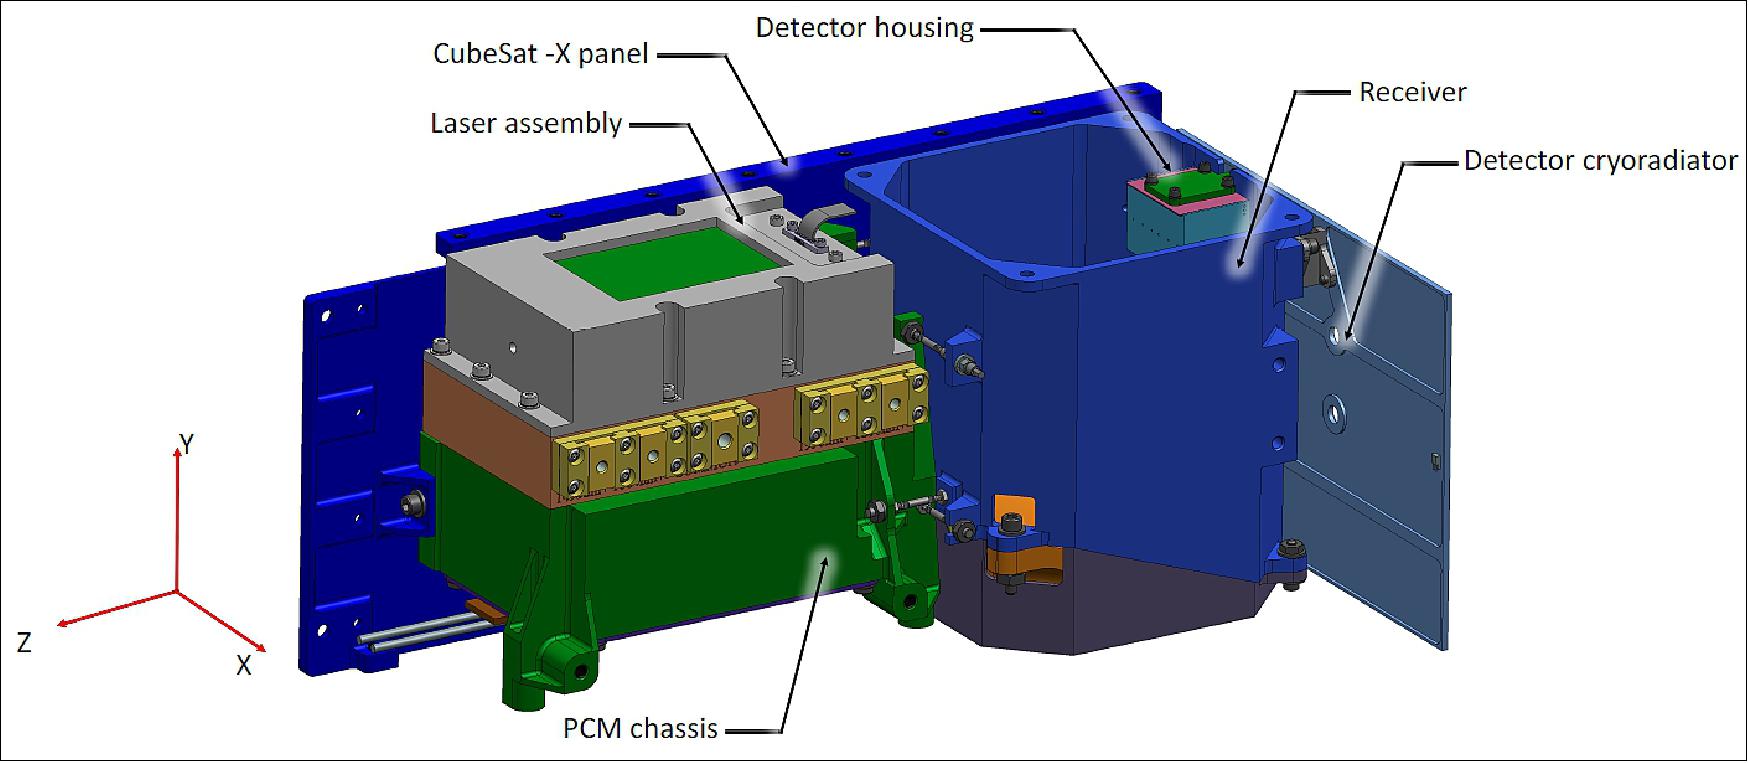 Figure 12: LF reflectometer assembly (three-dimensional model) (figure updated from Ref. 12). The reflectometer assembly is attached semi-kinematically through the rigid phase-change material (PCM) chassis mounting features to the X and Y structural panels of the spacecraft (image credit: LF collaboration)